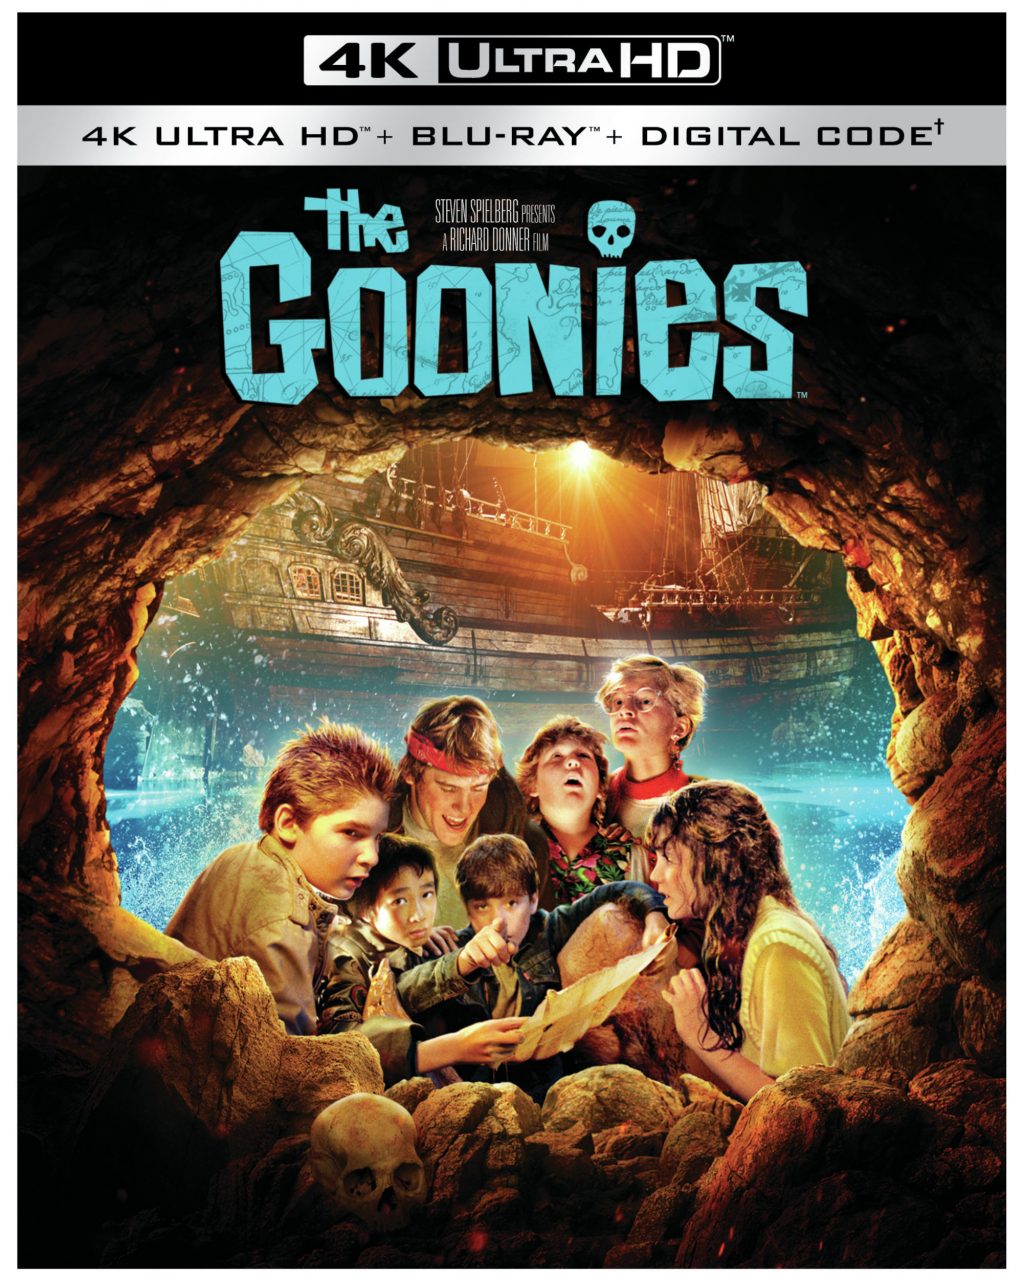 The Goonies 4K Ultra HD Combo Pack cover (Warner Bros. Home Entertainment)